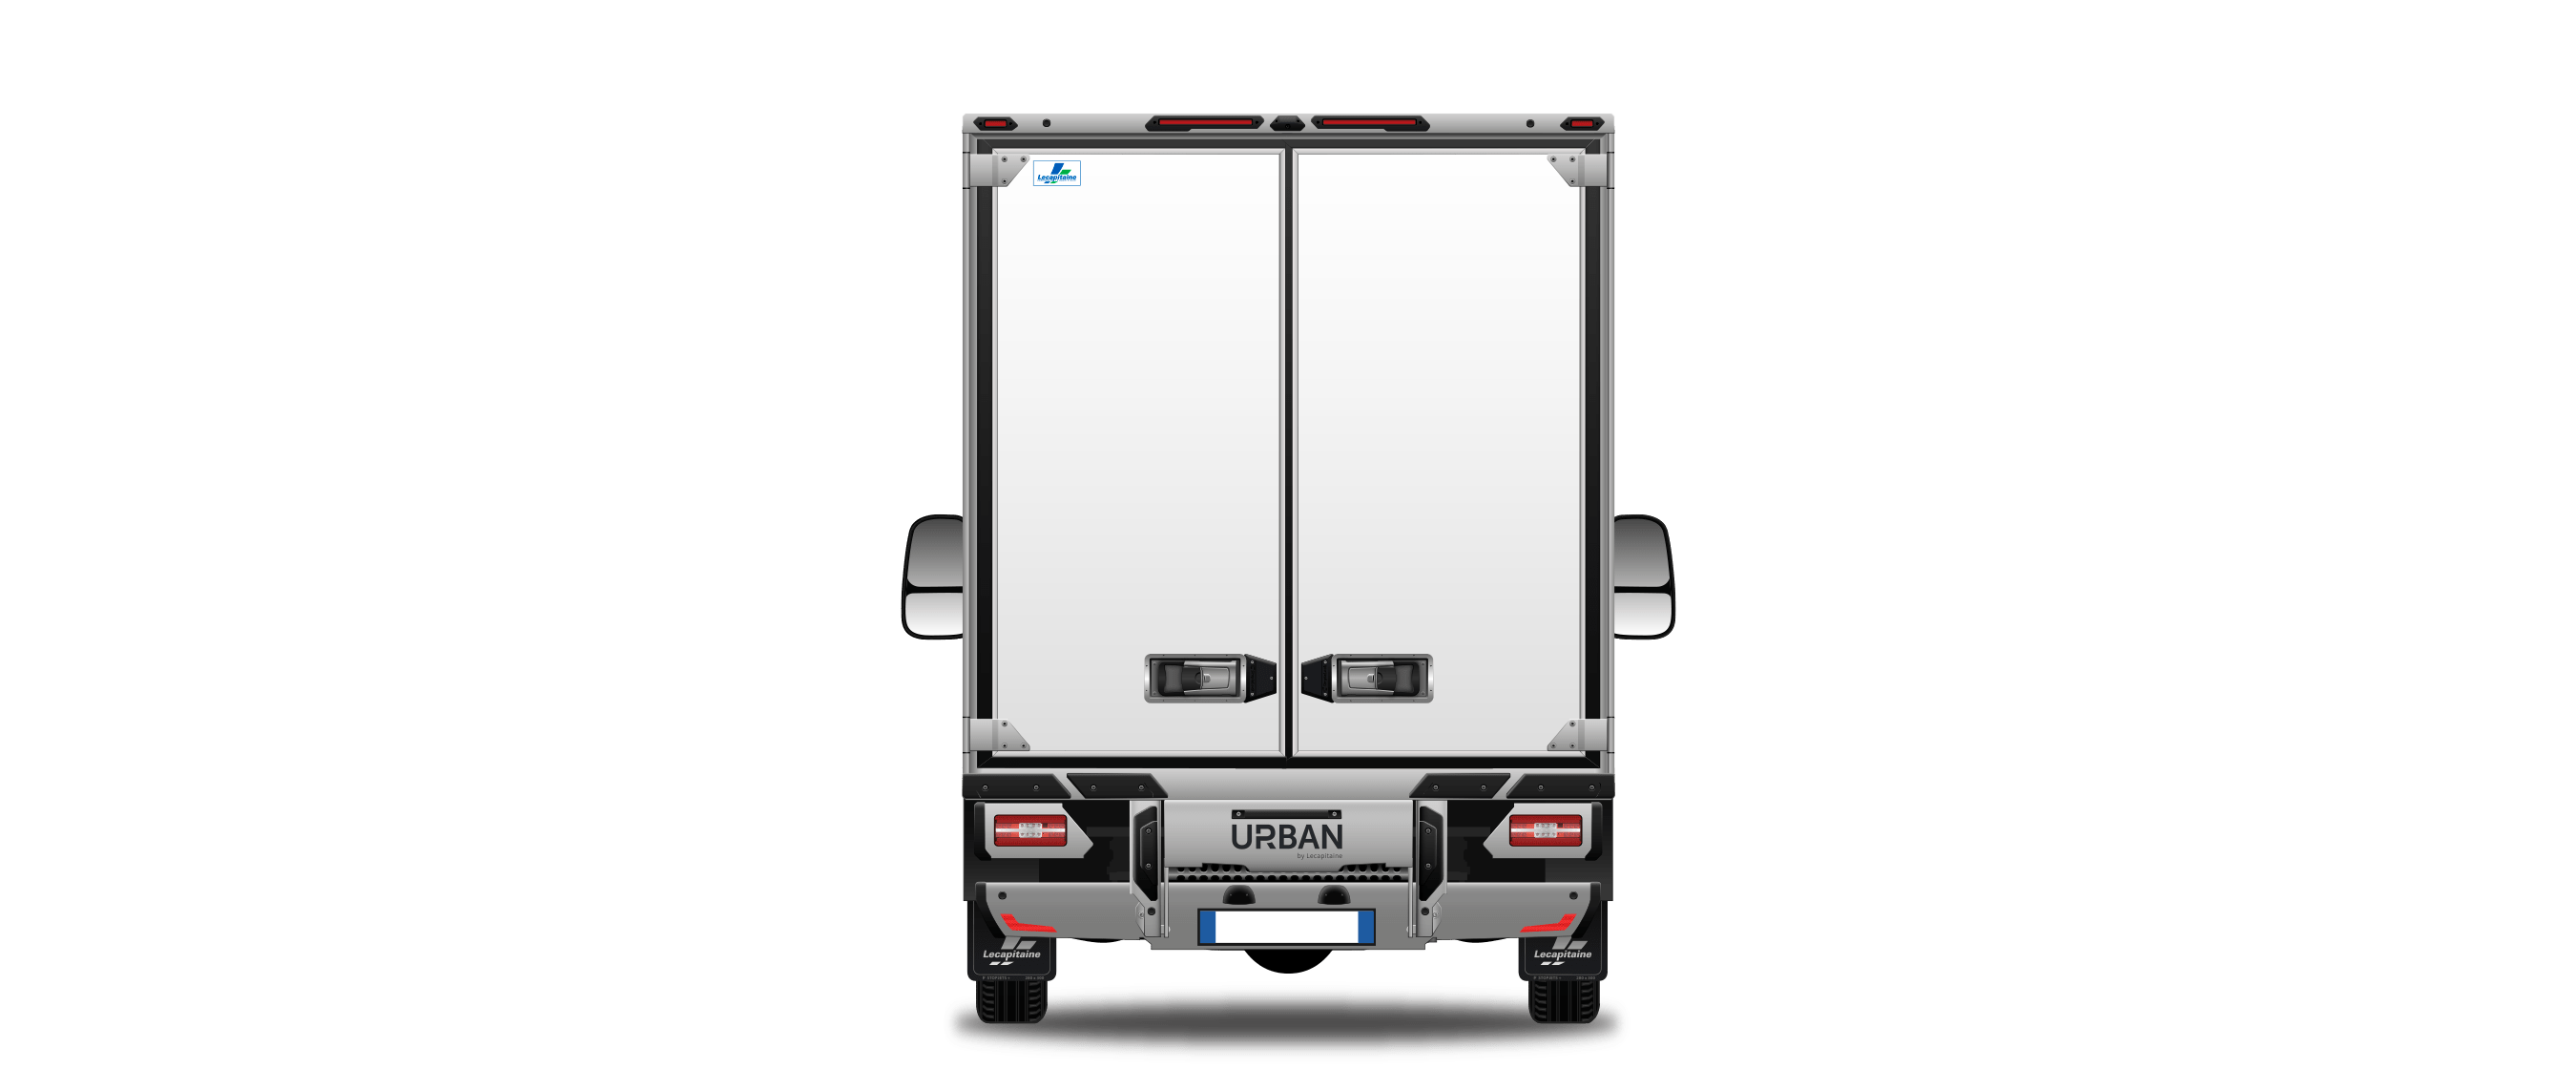 iveco daily 35s